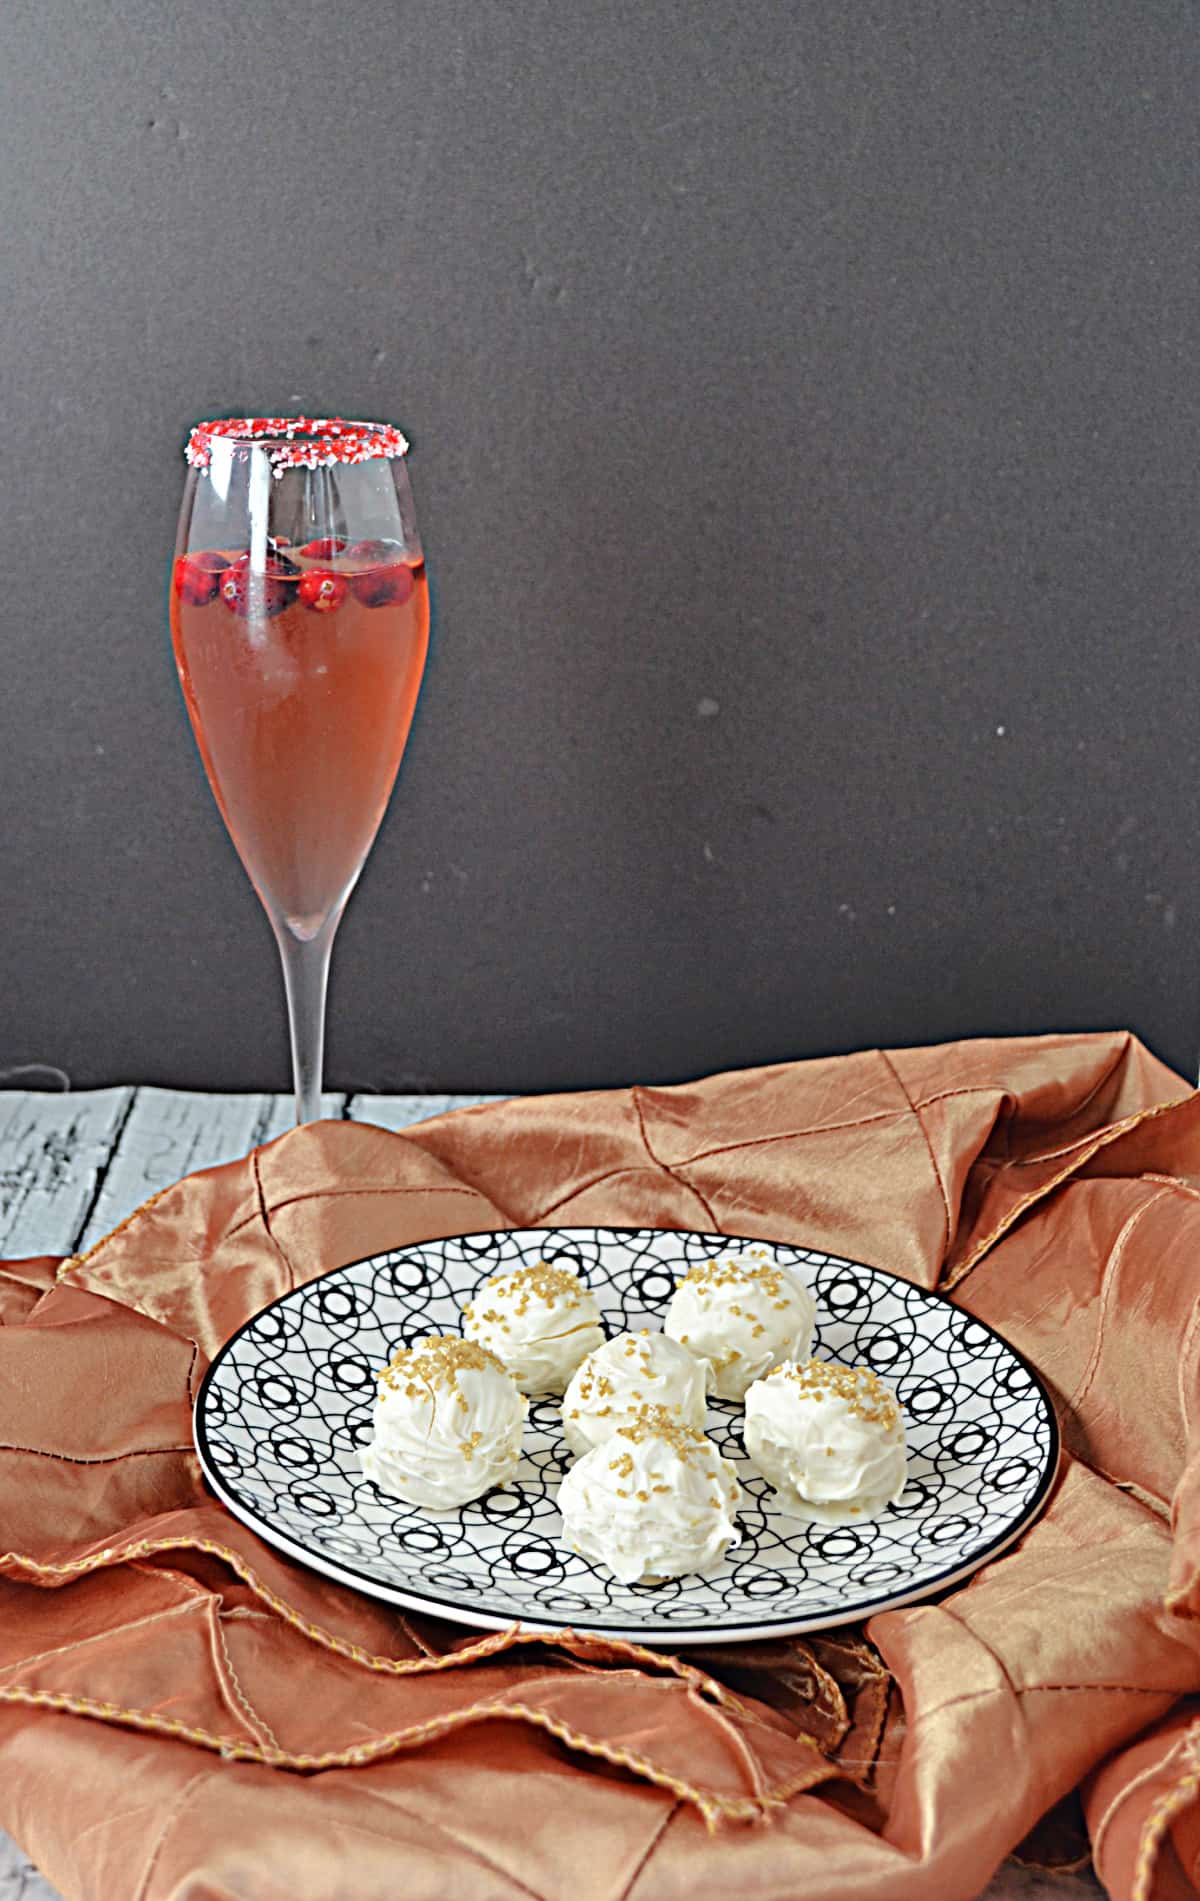 A plate of champagne truffles with a cranberry cocktail behind it.